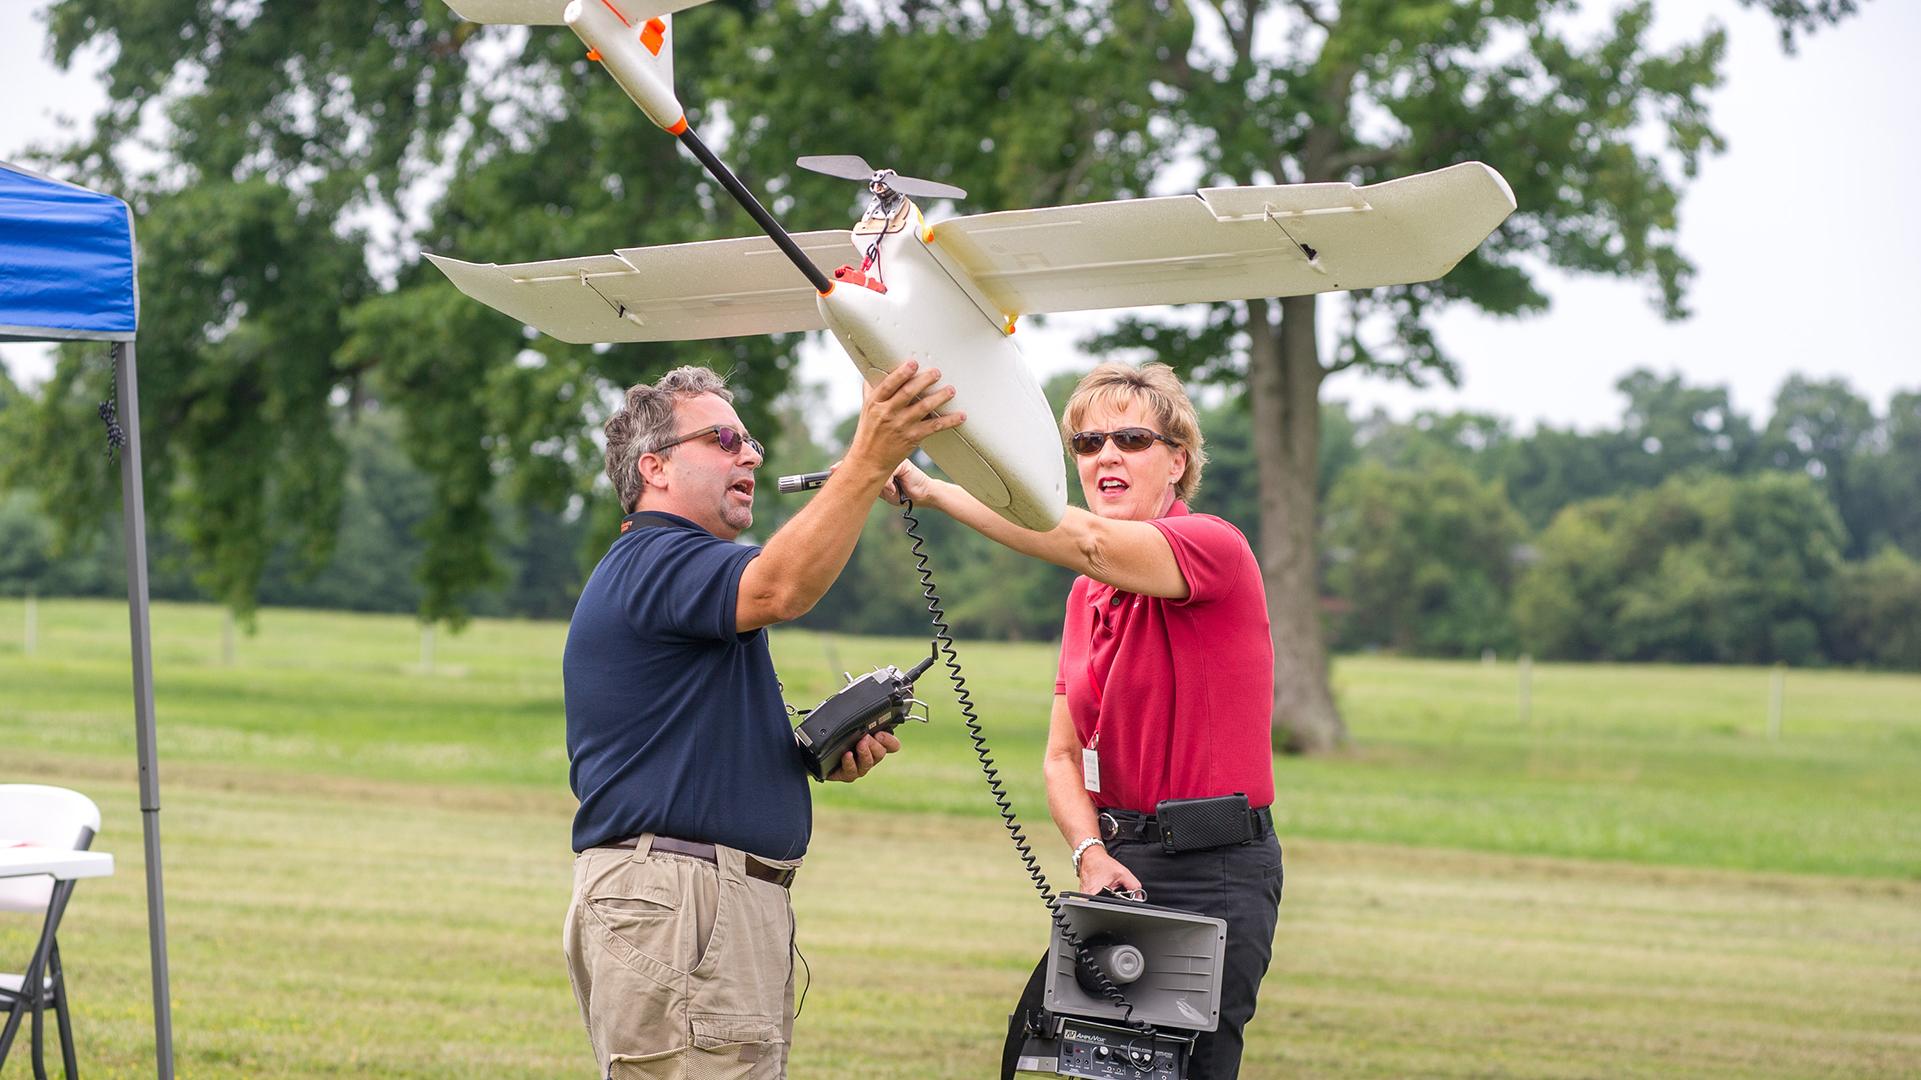 Two people holding up a precision ag equipment that looks like a small plane